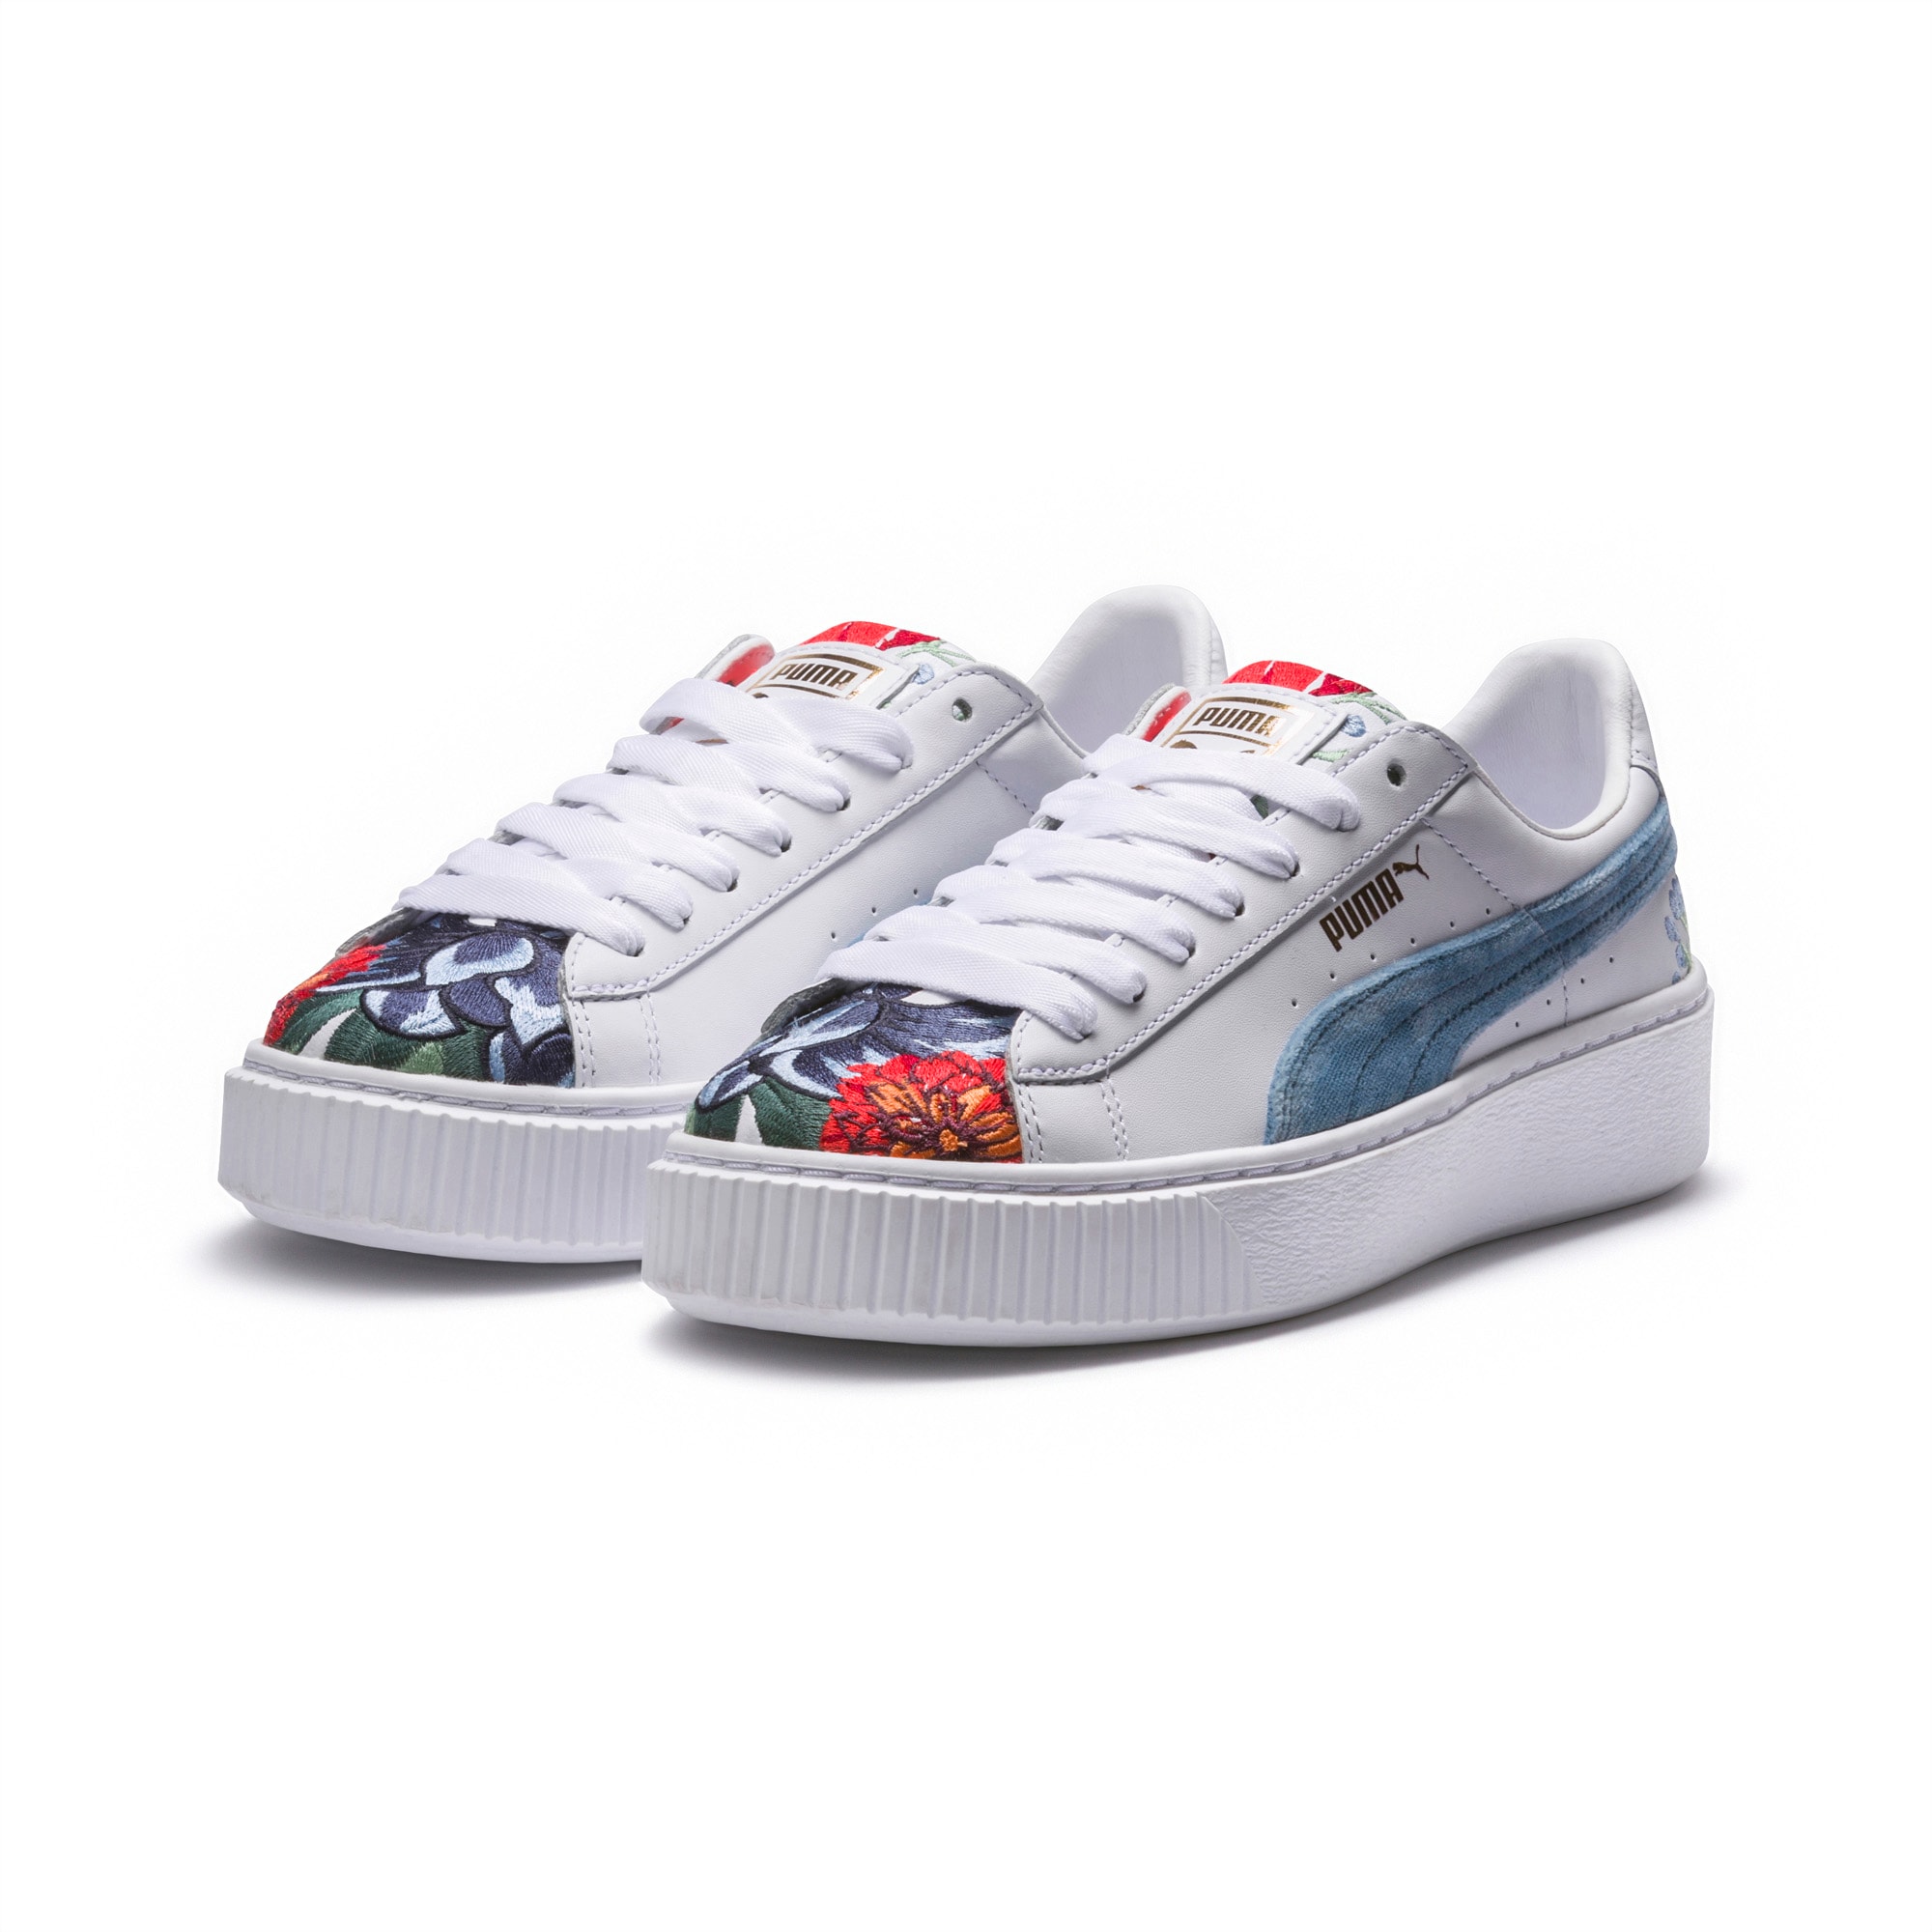 Platform Hyper Embroidered Women's Sneakers | PUMA US